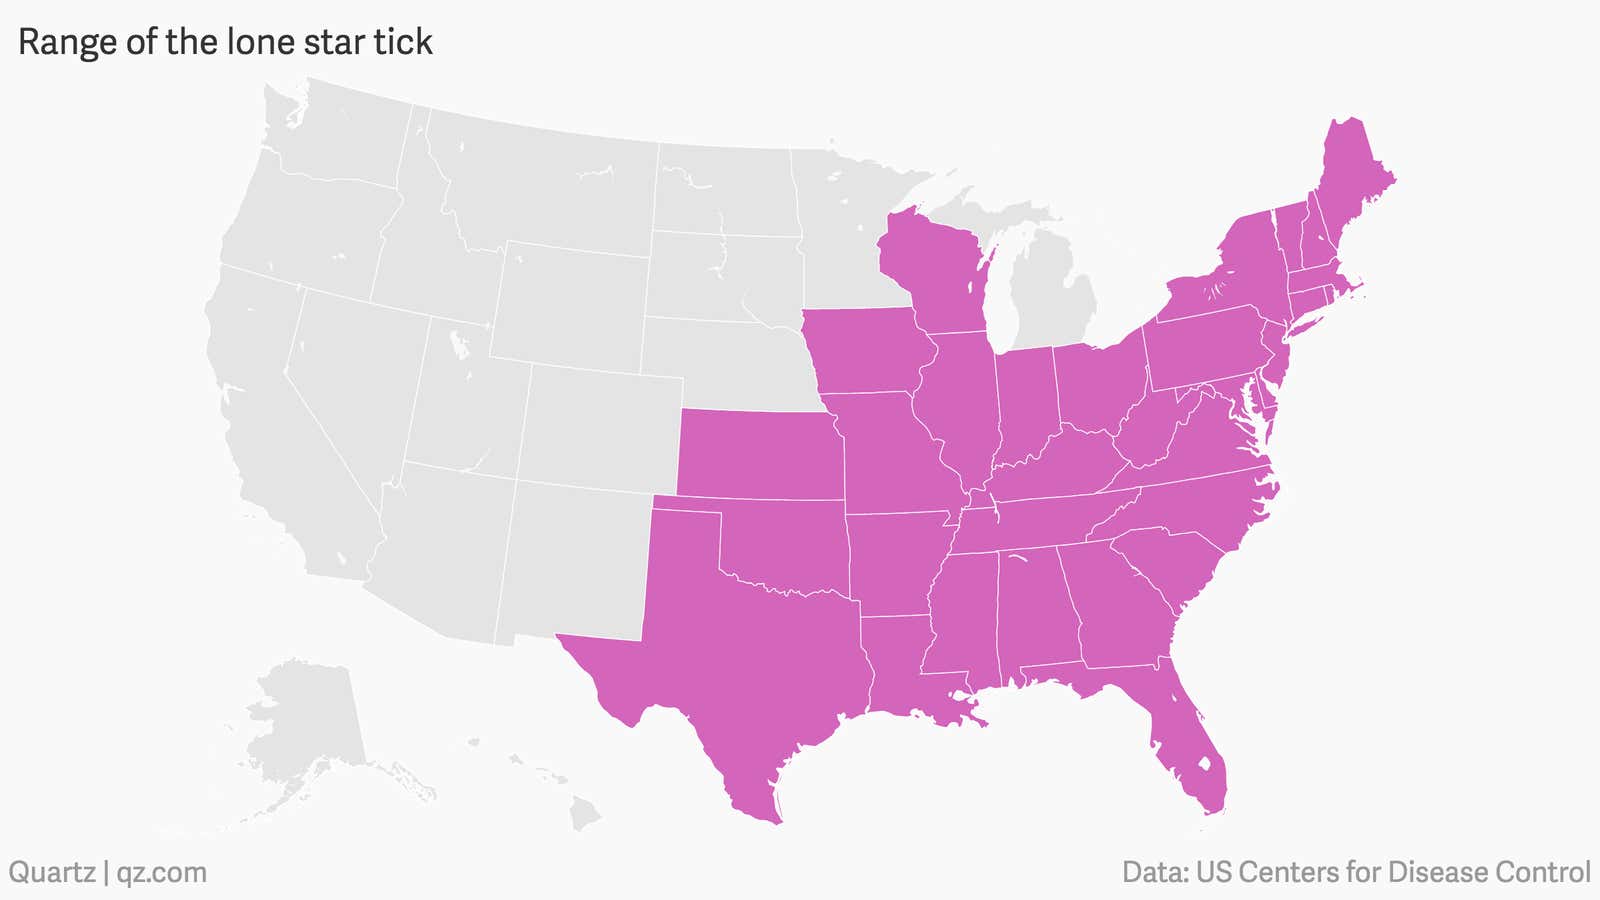 The habitat of the Lone Star tick has grown to include at least parts of the above states.